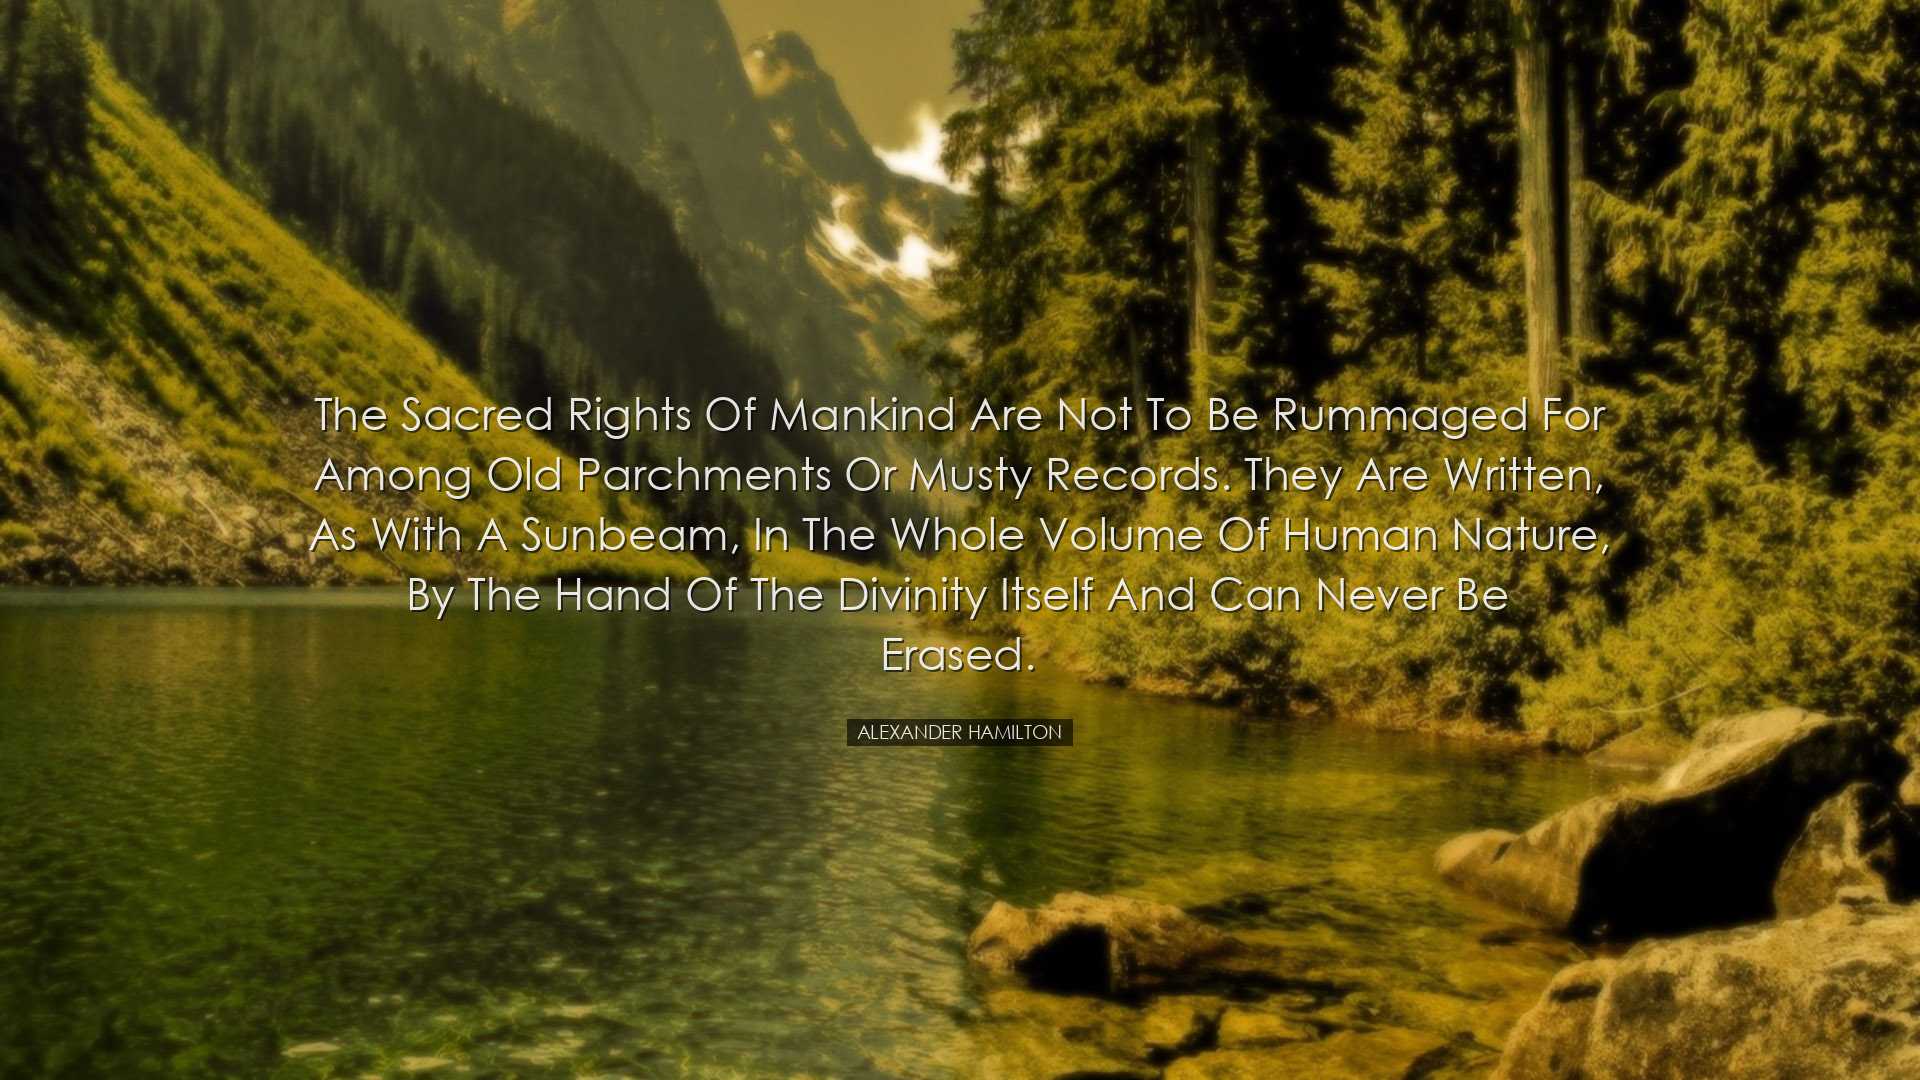 The sacred rights of mankind are not to be rummaged for among old